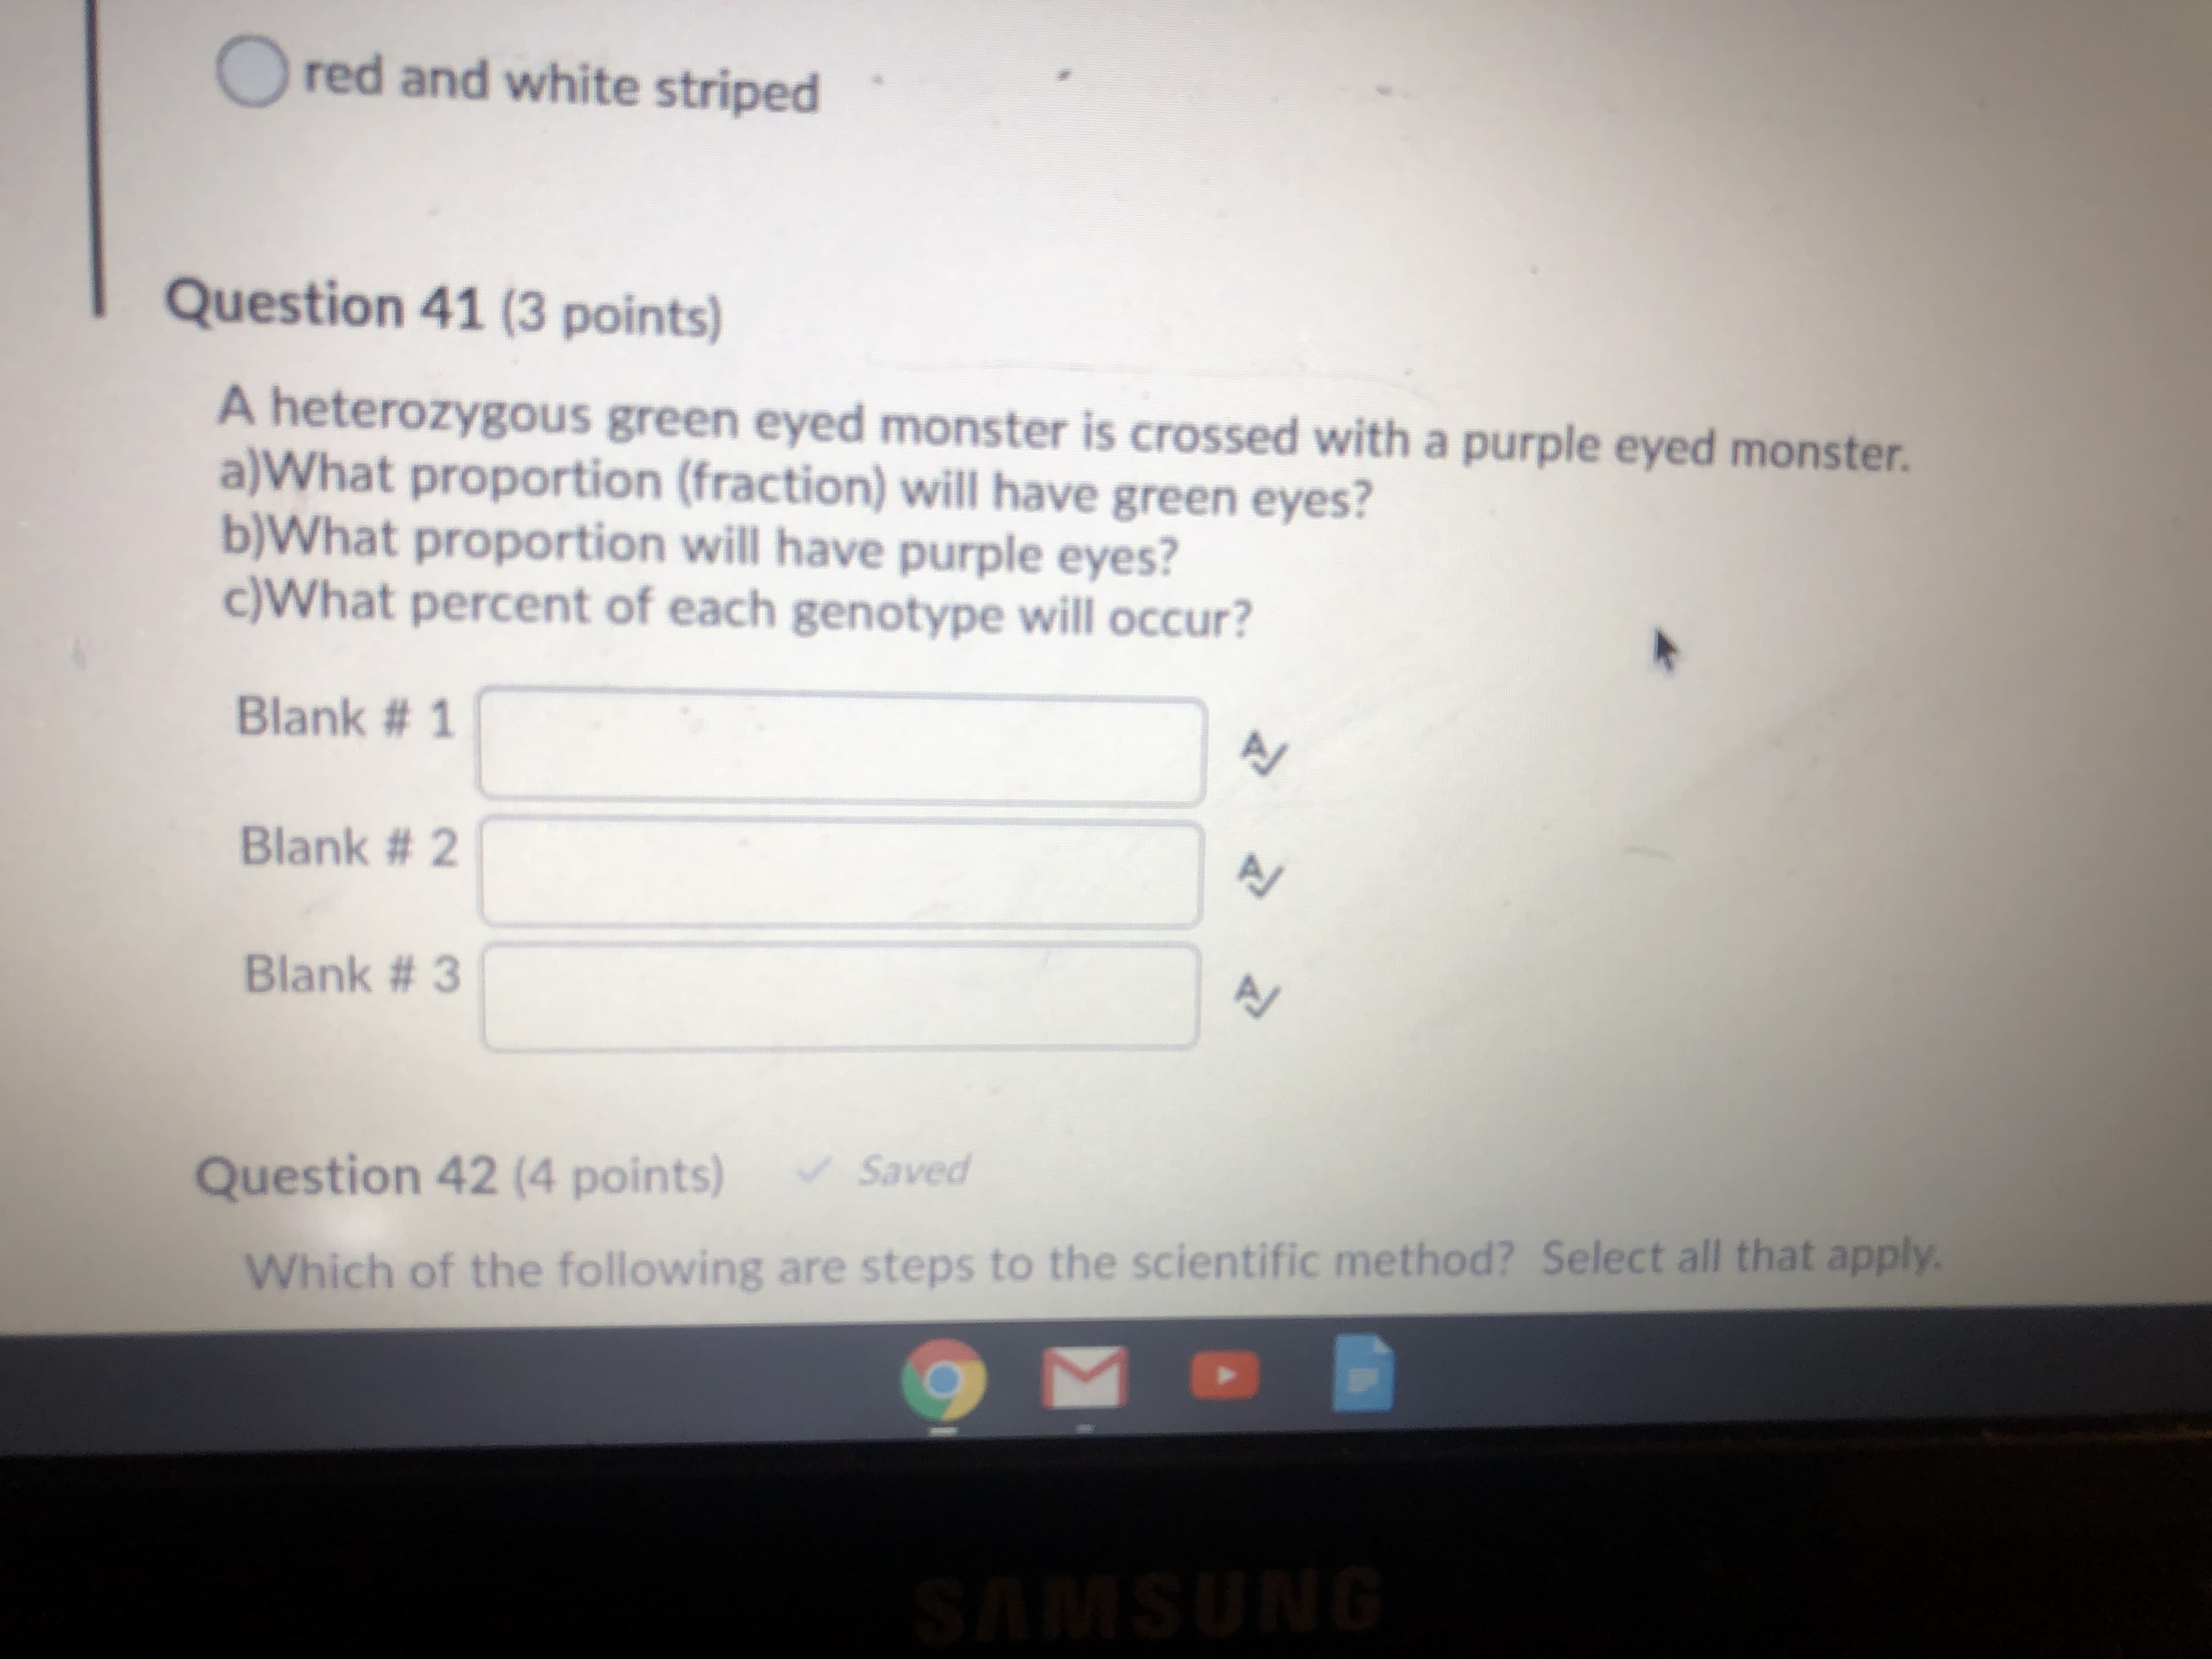 A heterozygous green eyed monster is crossed with a purple eyed monster.
a)What proportion (fraction) will have green eyes?
b)What proportion will have purple eyes?
c)What percent of each genotype will occur?
Blank # 1
Blank # 2
Blank # 3
